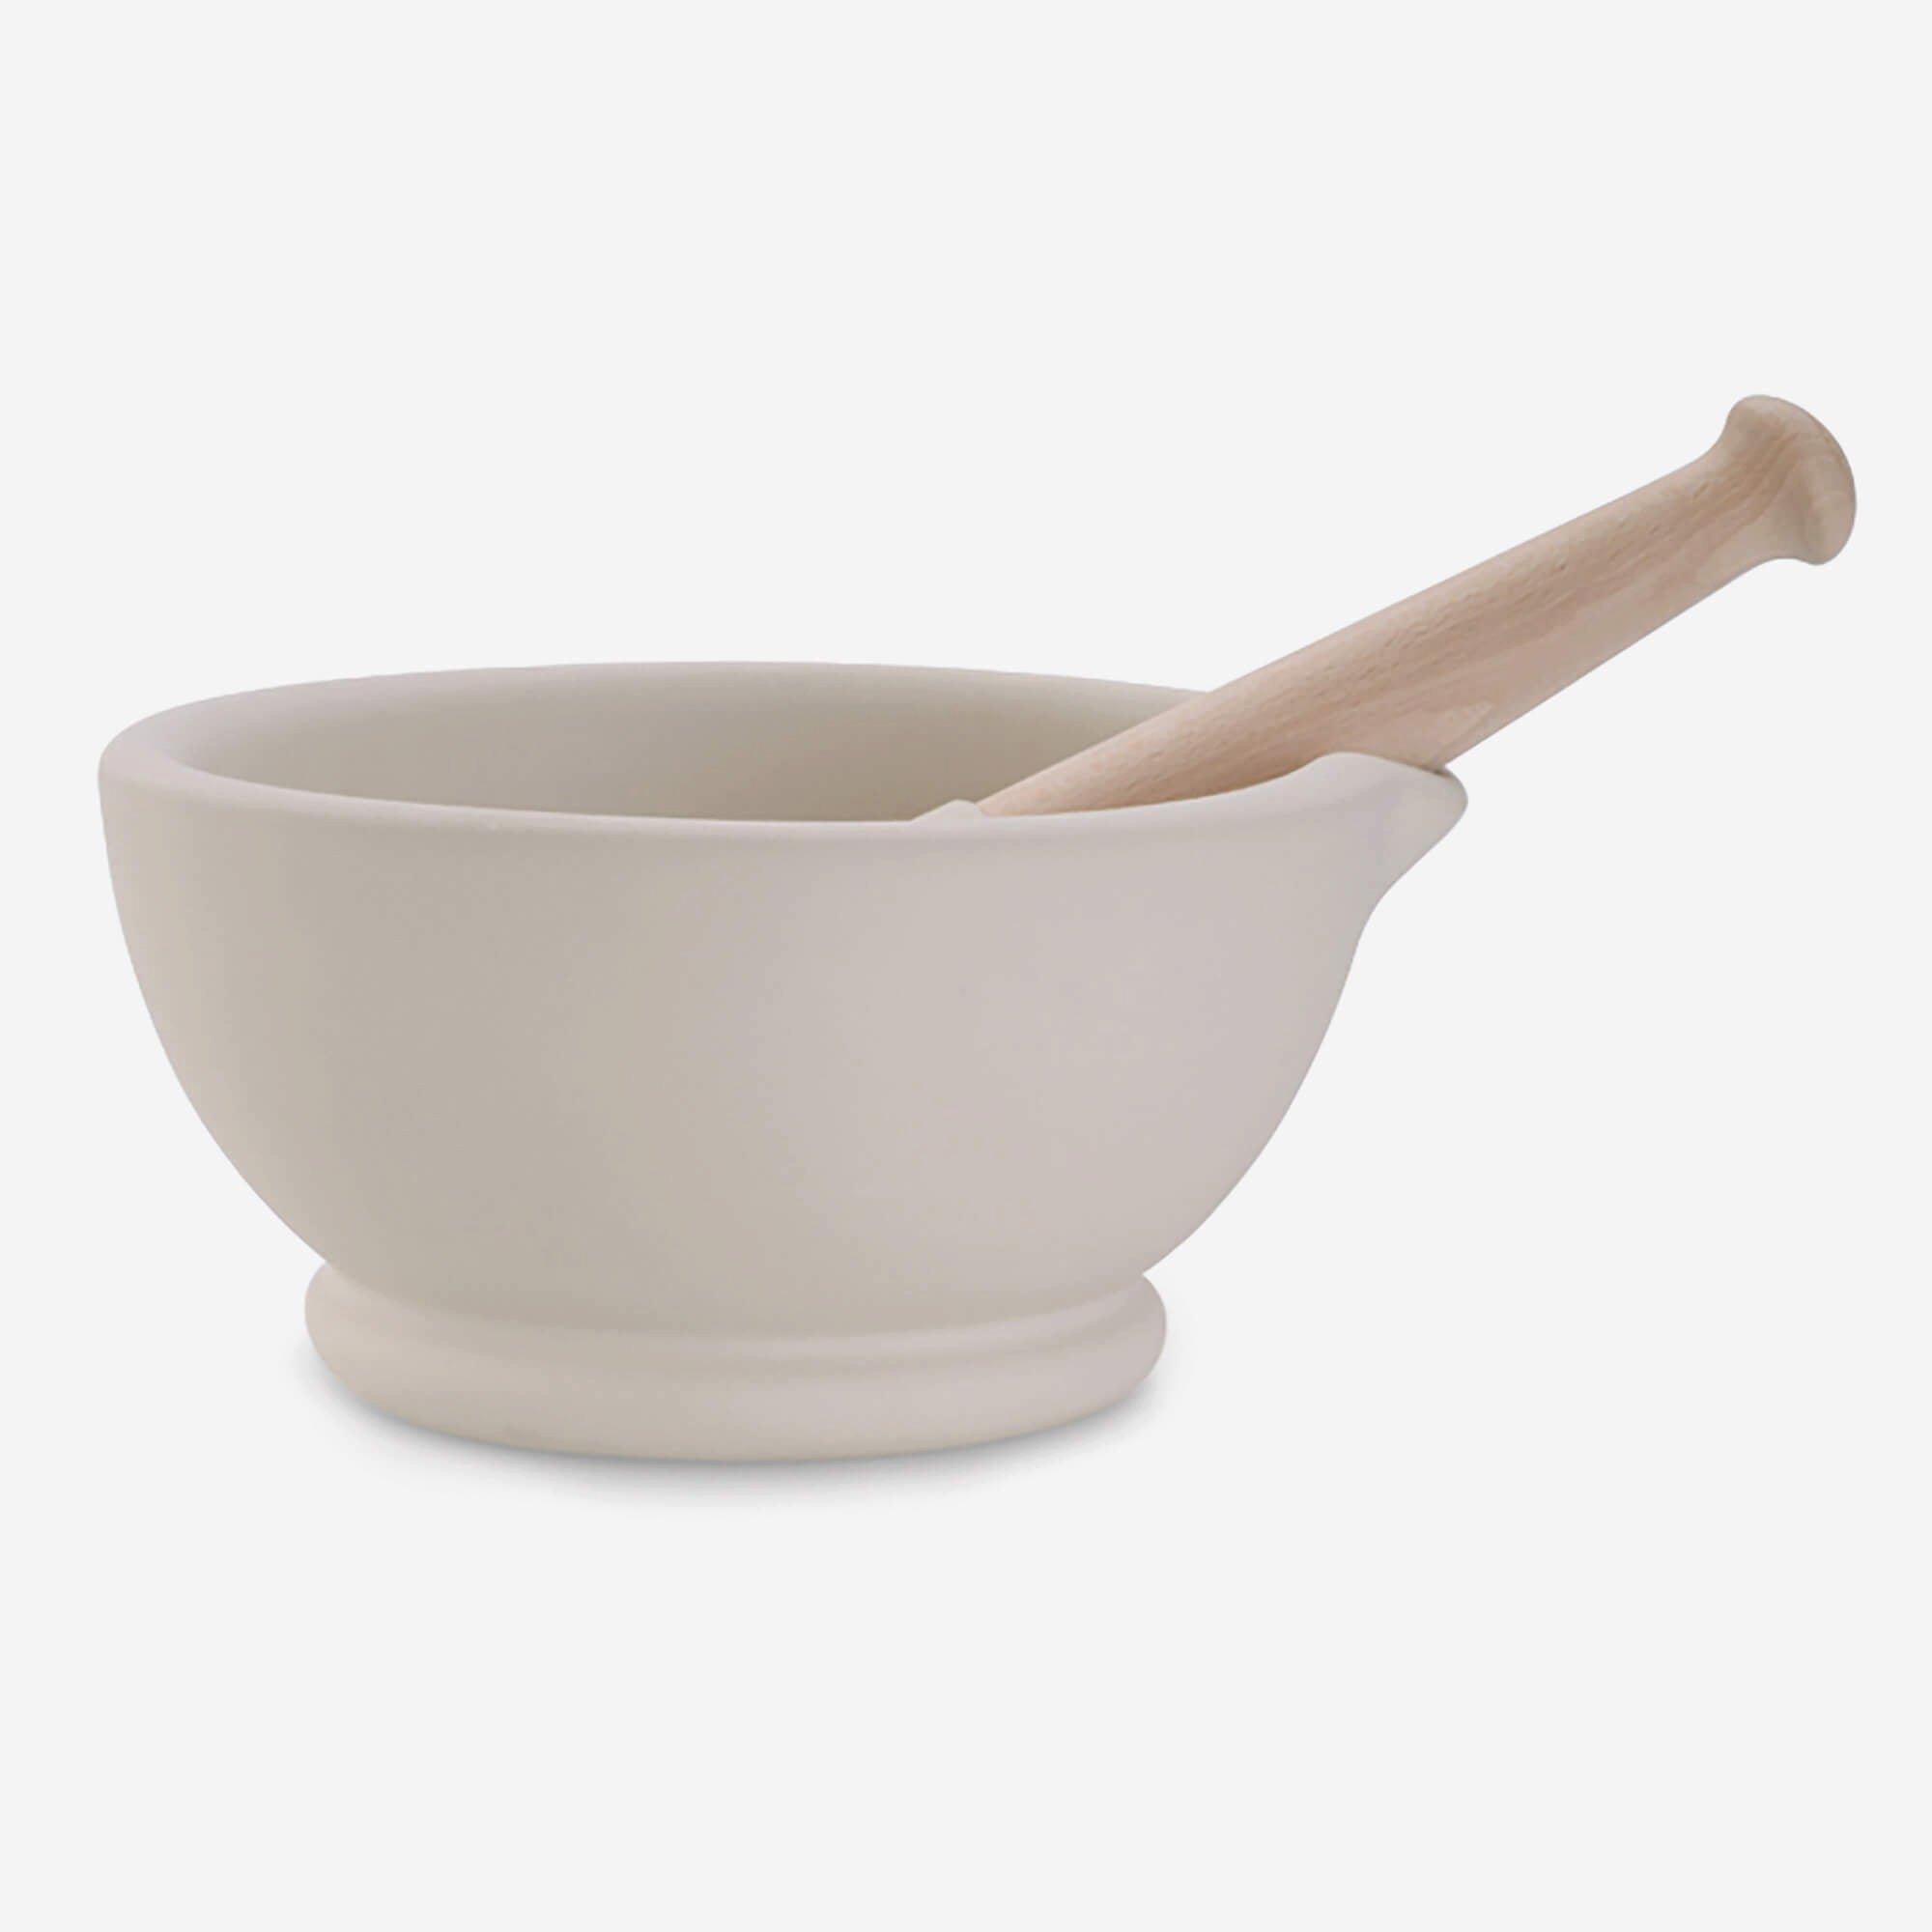 Stone Mortar & Pestle with Wooden Handle Boxed 8